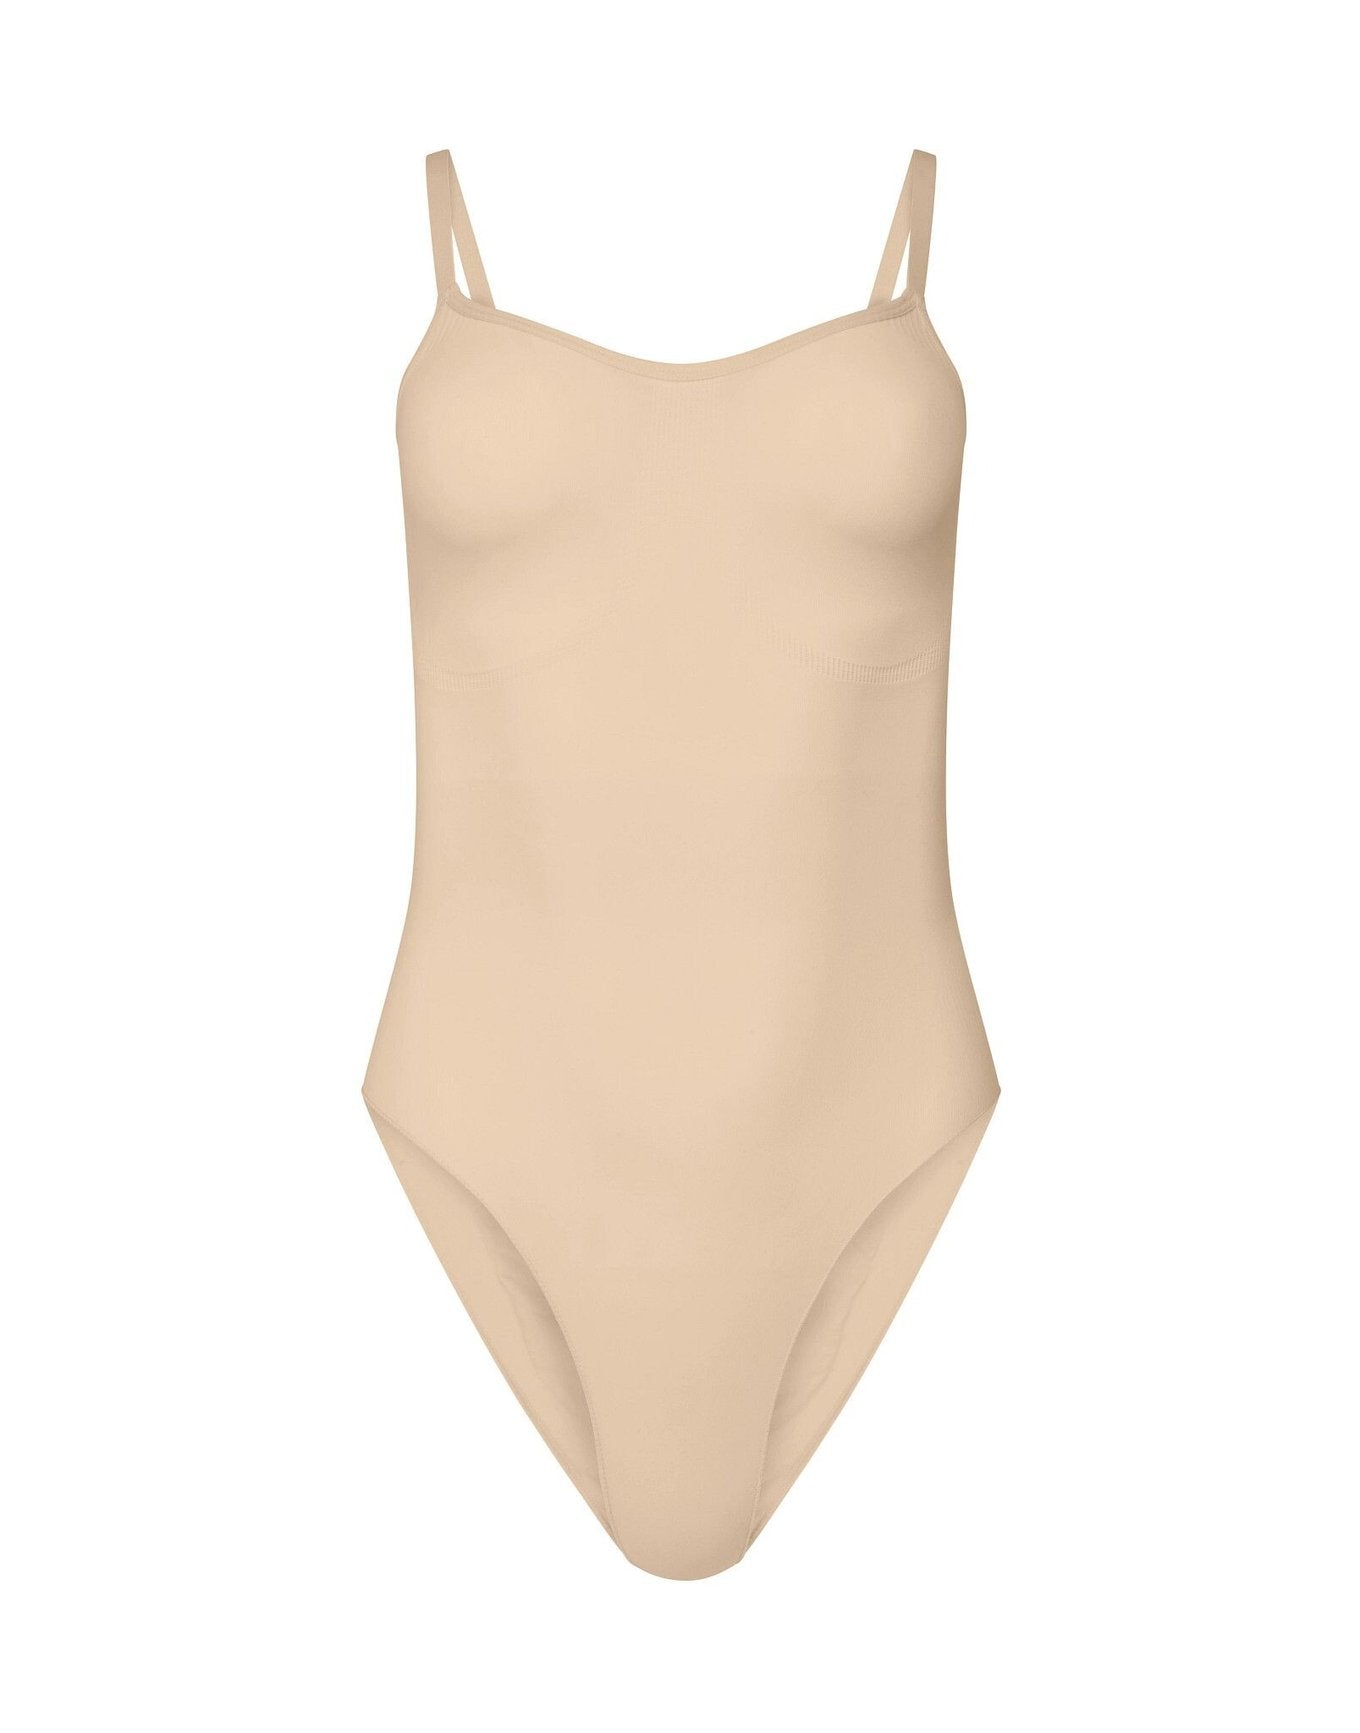 nueskin Cady High-Compression Cheeky Bodysuit in color Dawn and shape bodysuit